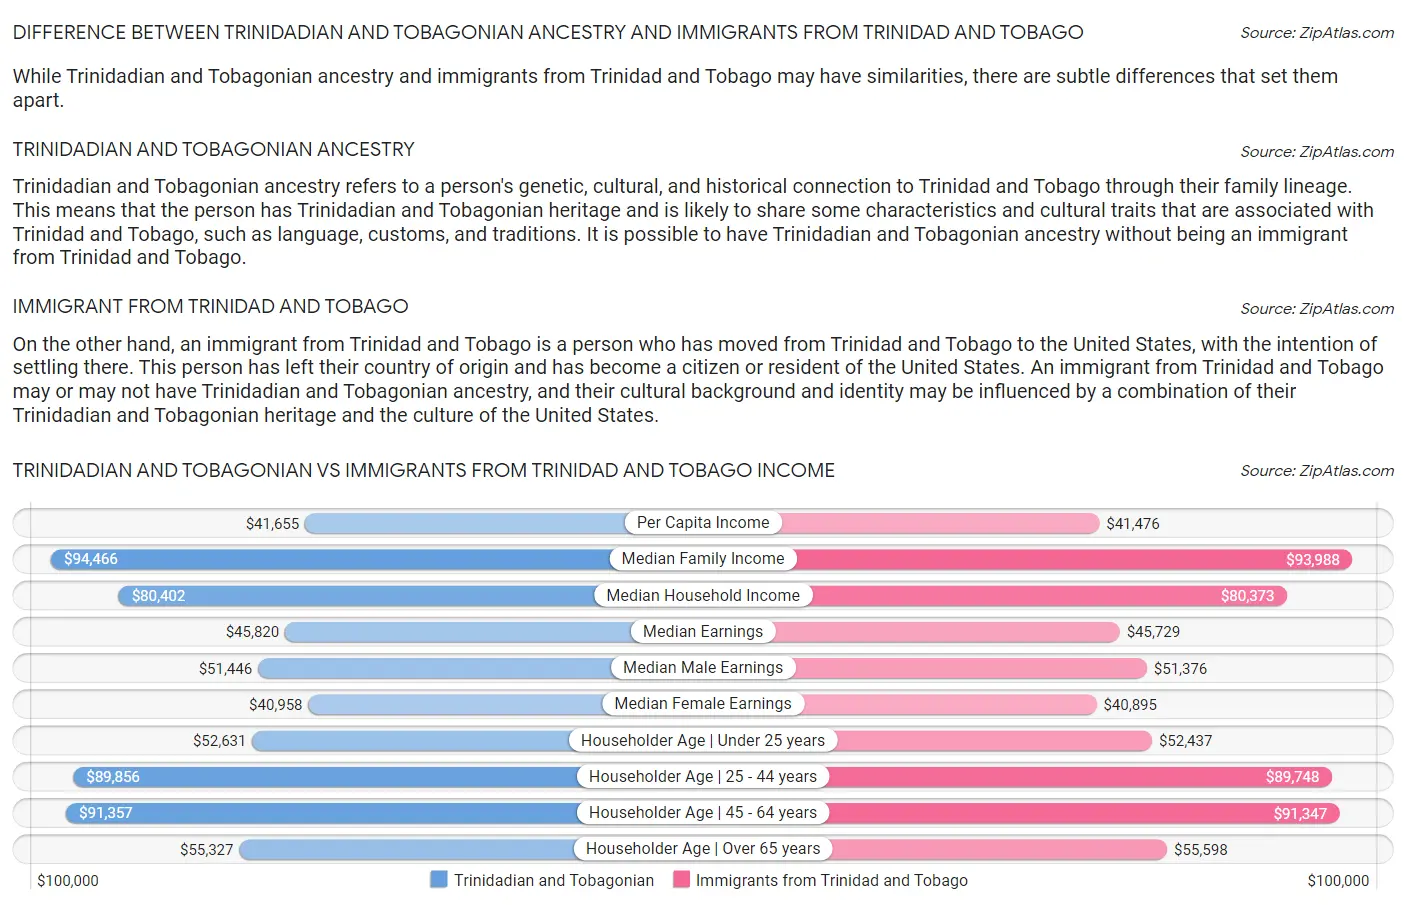 Trinidadian and Tobagonian vs Immigrants from Trinidad and Tobago Income